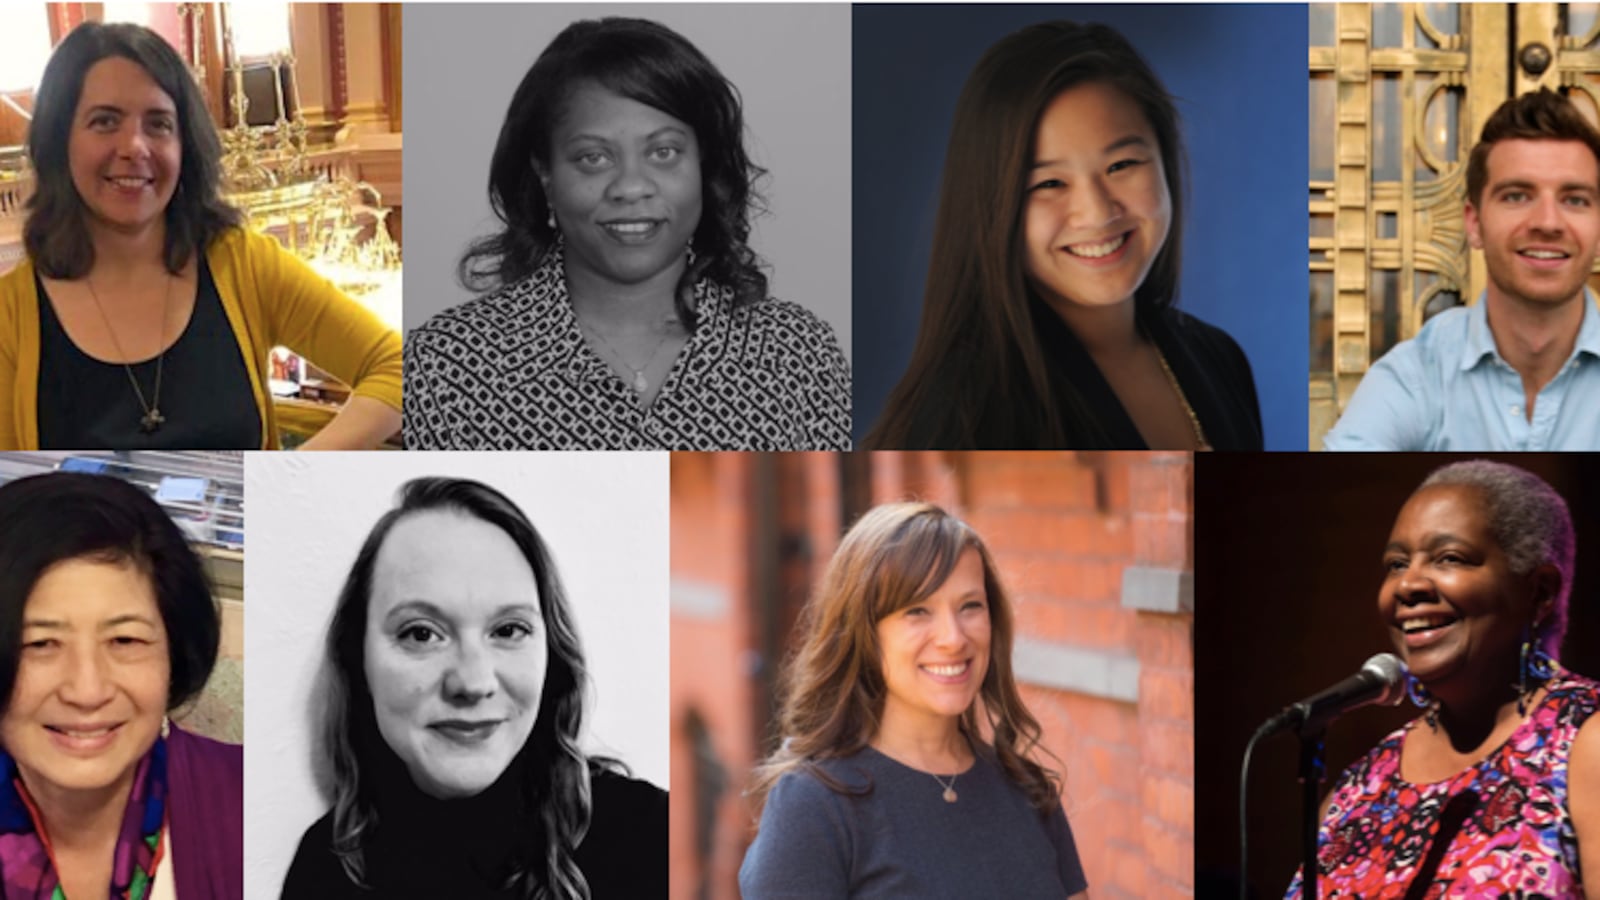 Chalkbeat’s newest local leaders and our new slate of story editors. Clockwise from top: Colorado bureau chief Erica Meltzer, Tennessee bureau chief Jacinthia Jones, Indiana bureau chief Stephanie Wang, Newark correspondent Patrick Wall, story editor Julie Topping, story editor Carrie Melago, Chicago bureau chief Cassie Walker Burke, and story editor Sharon Noguchi.